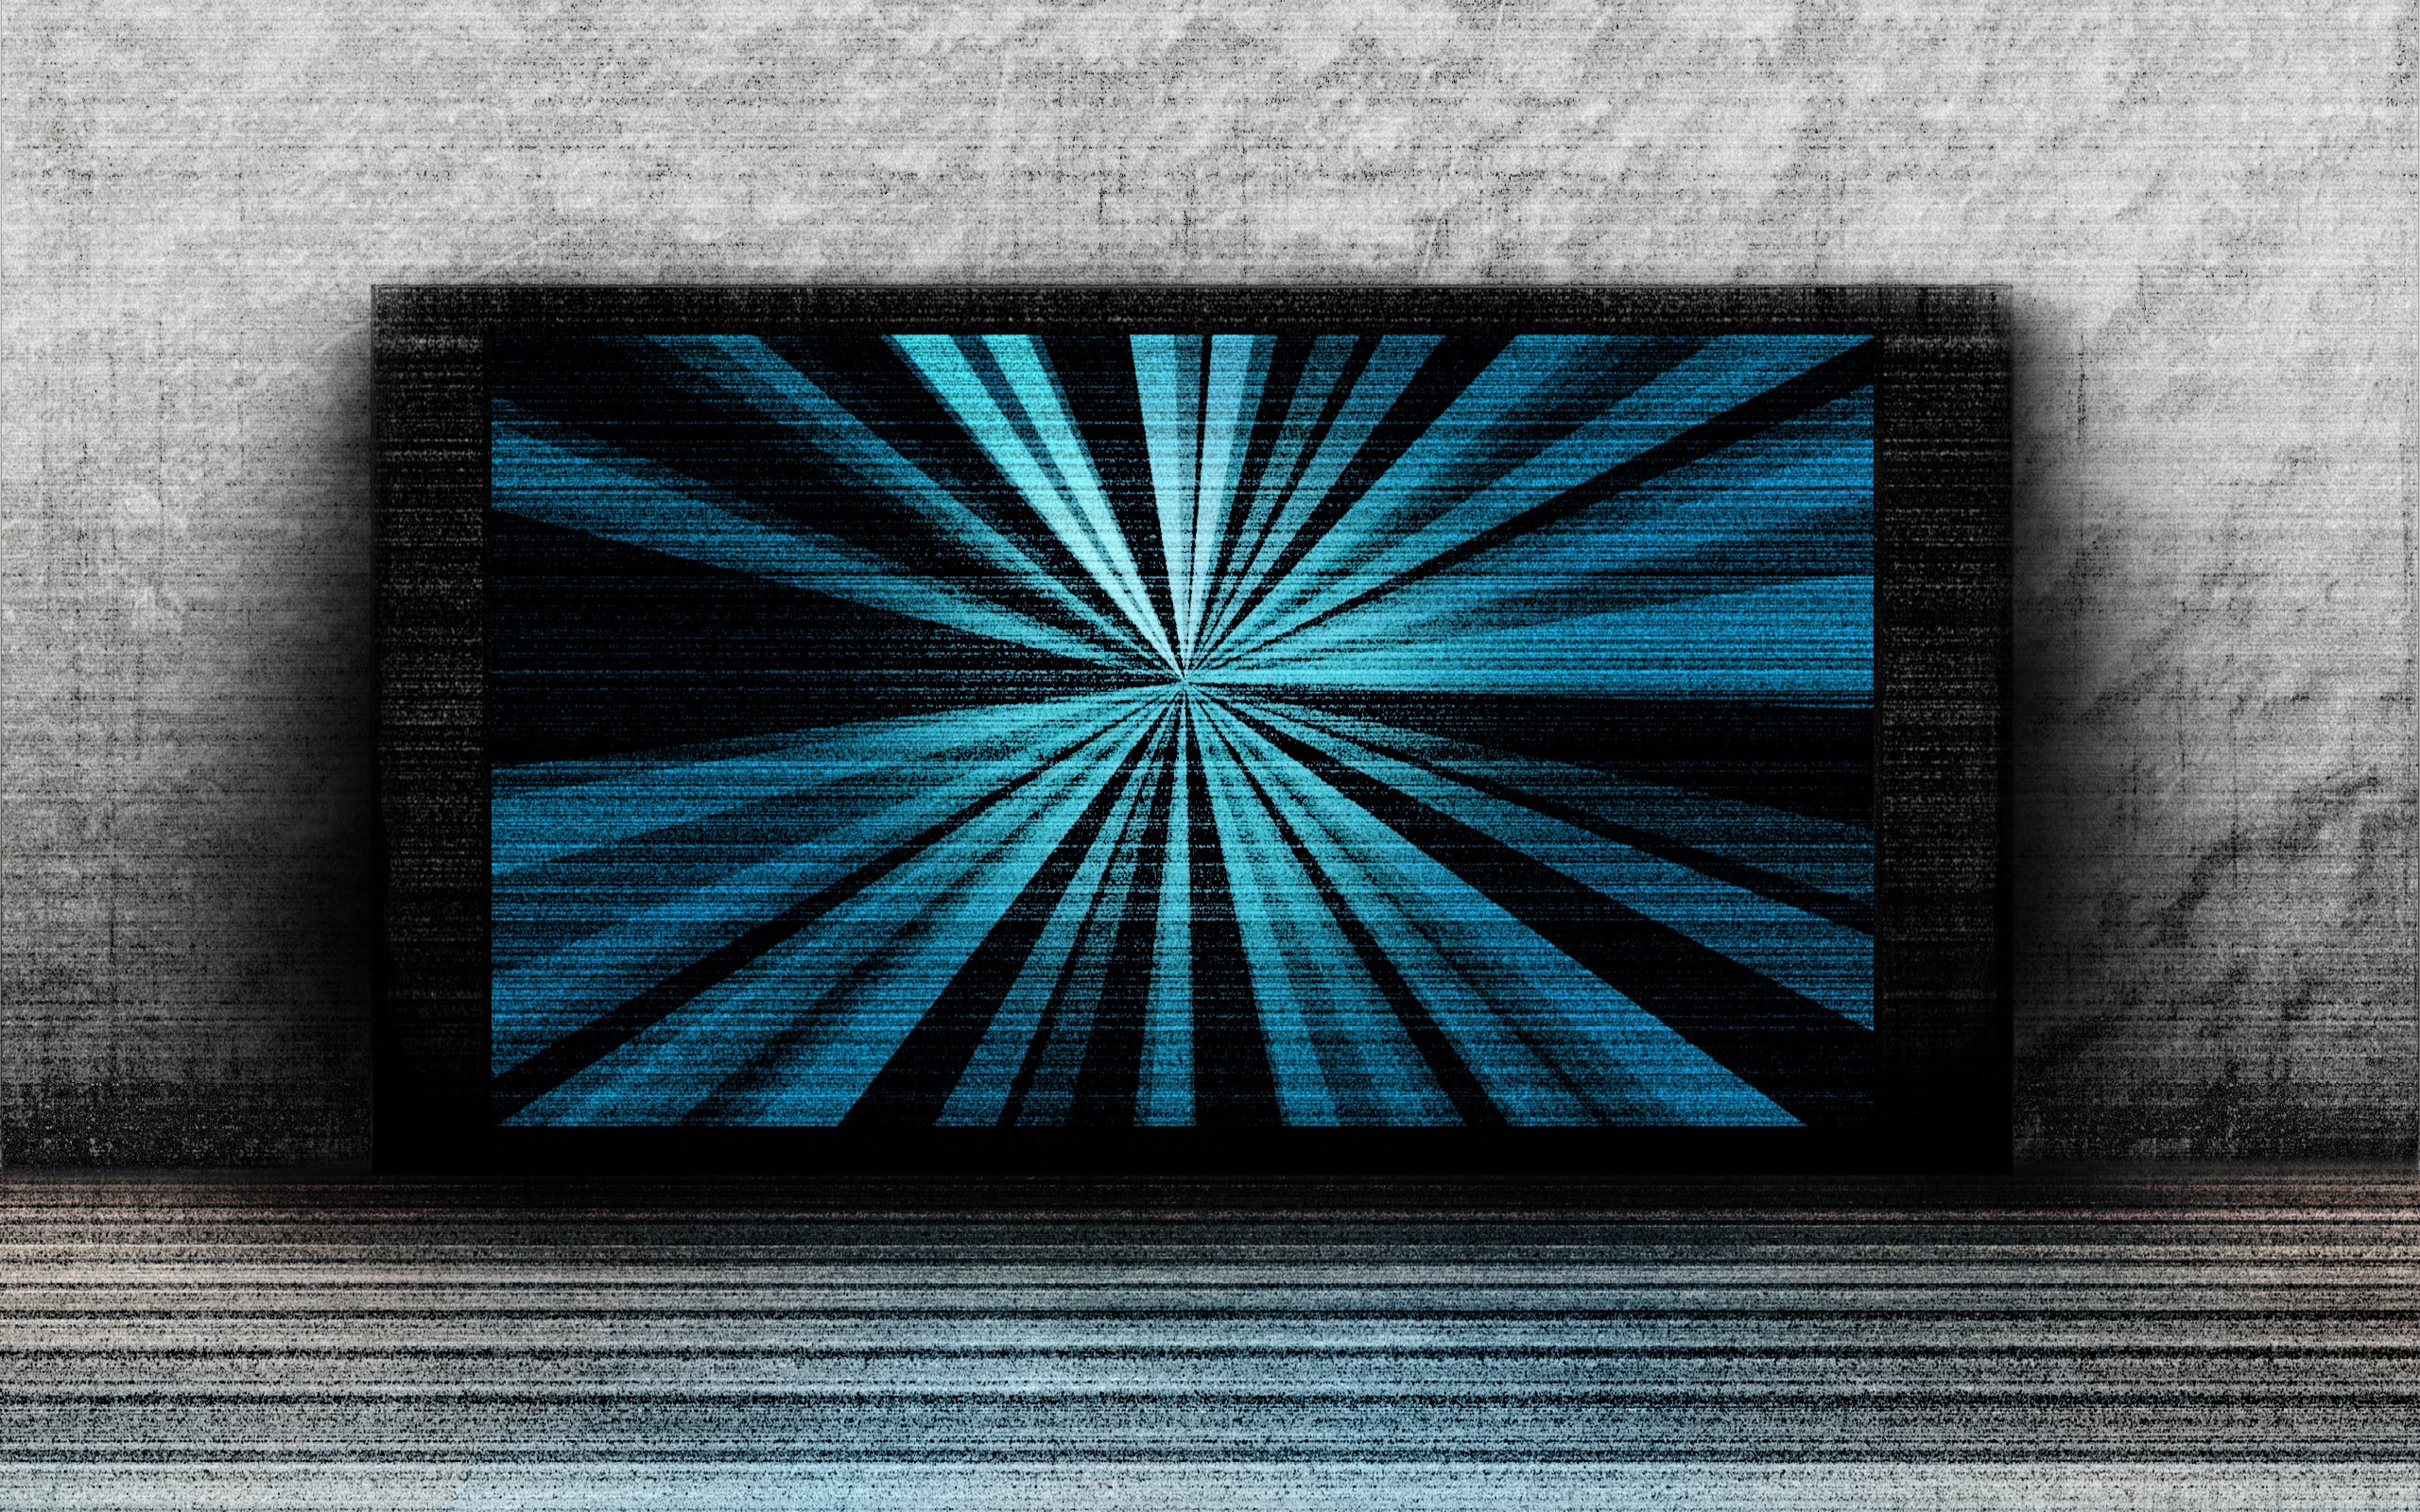 Grainy Abstract TV You are viewing a Graffiti Wallpaper